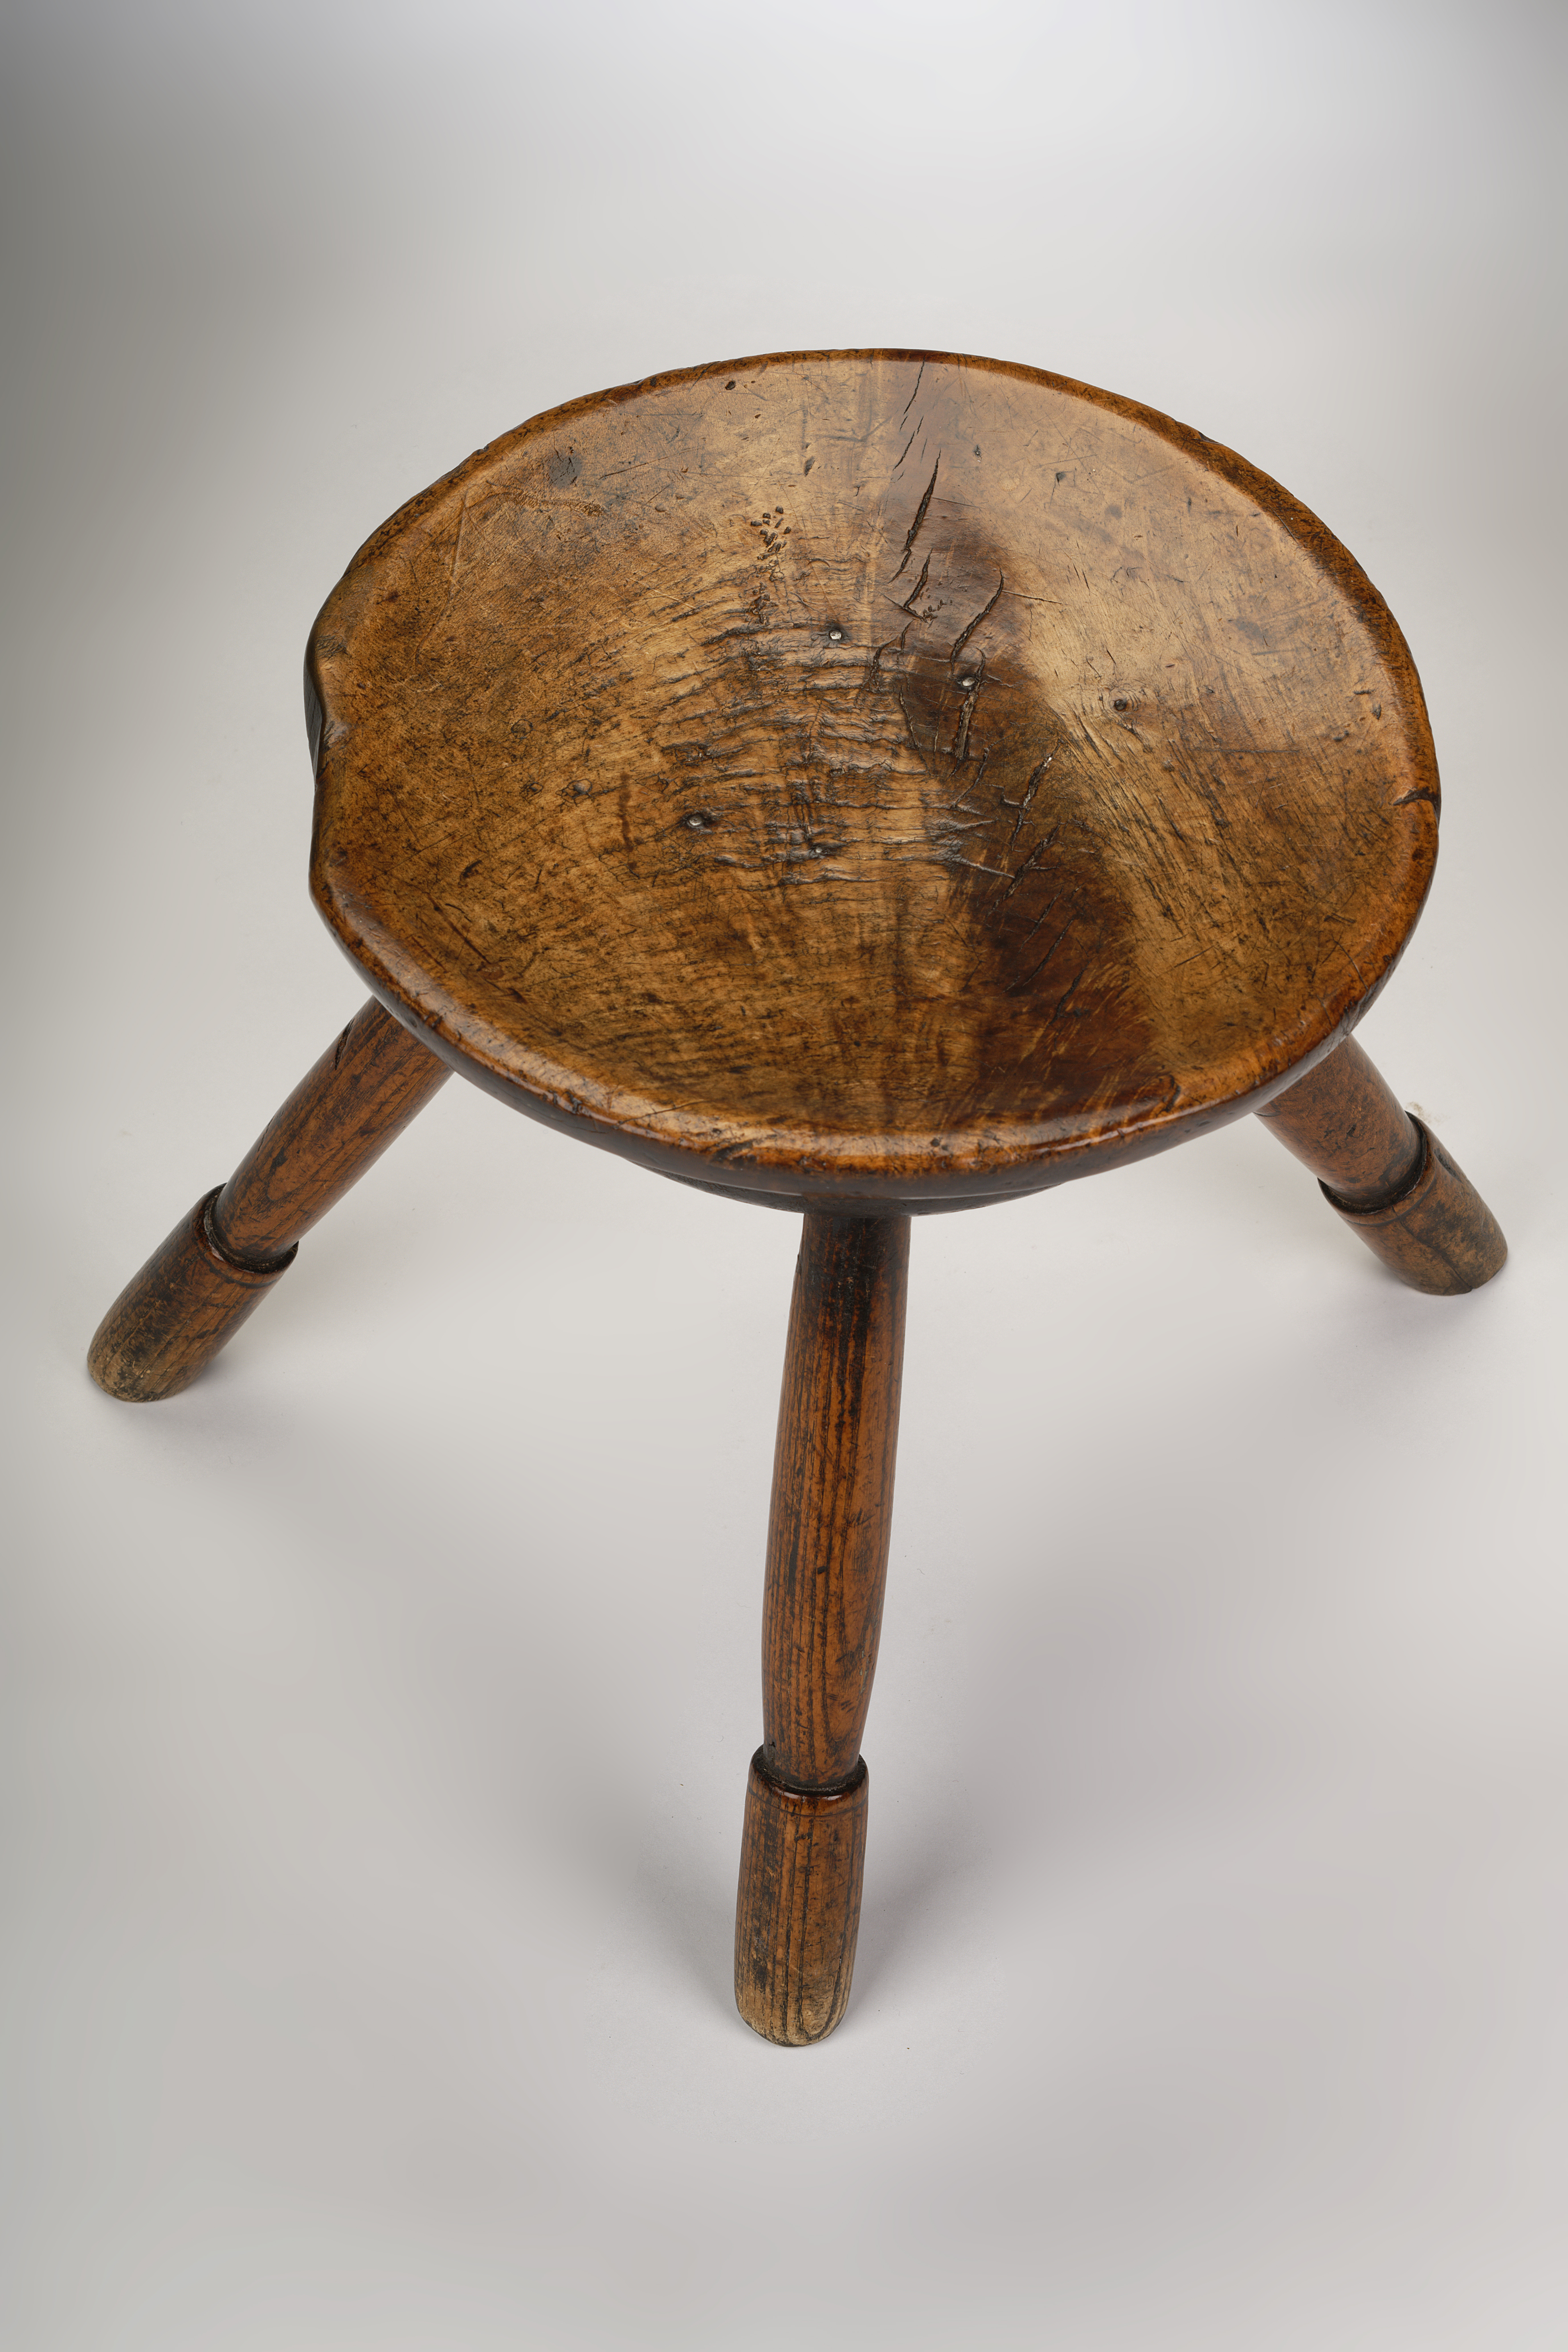 Image of A Turned Sycamore & Ash Dairy Stool.